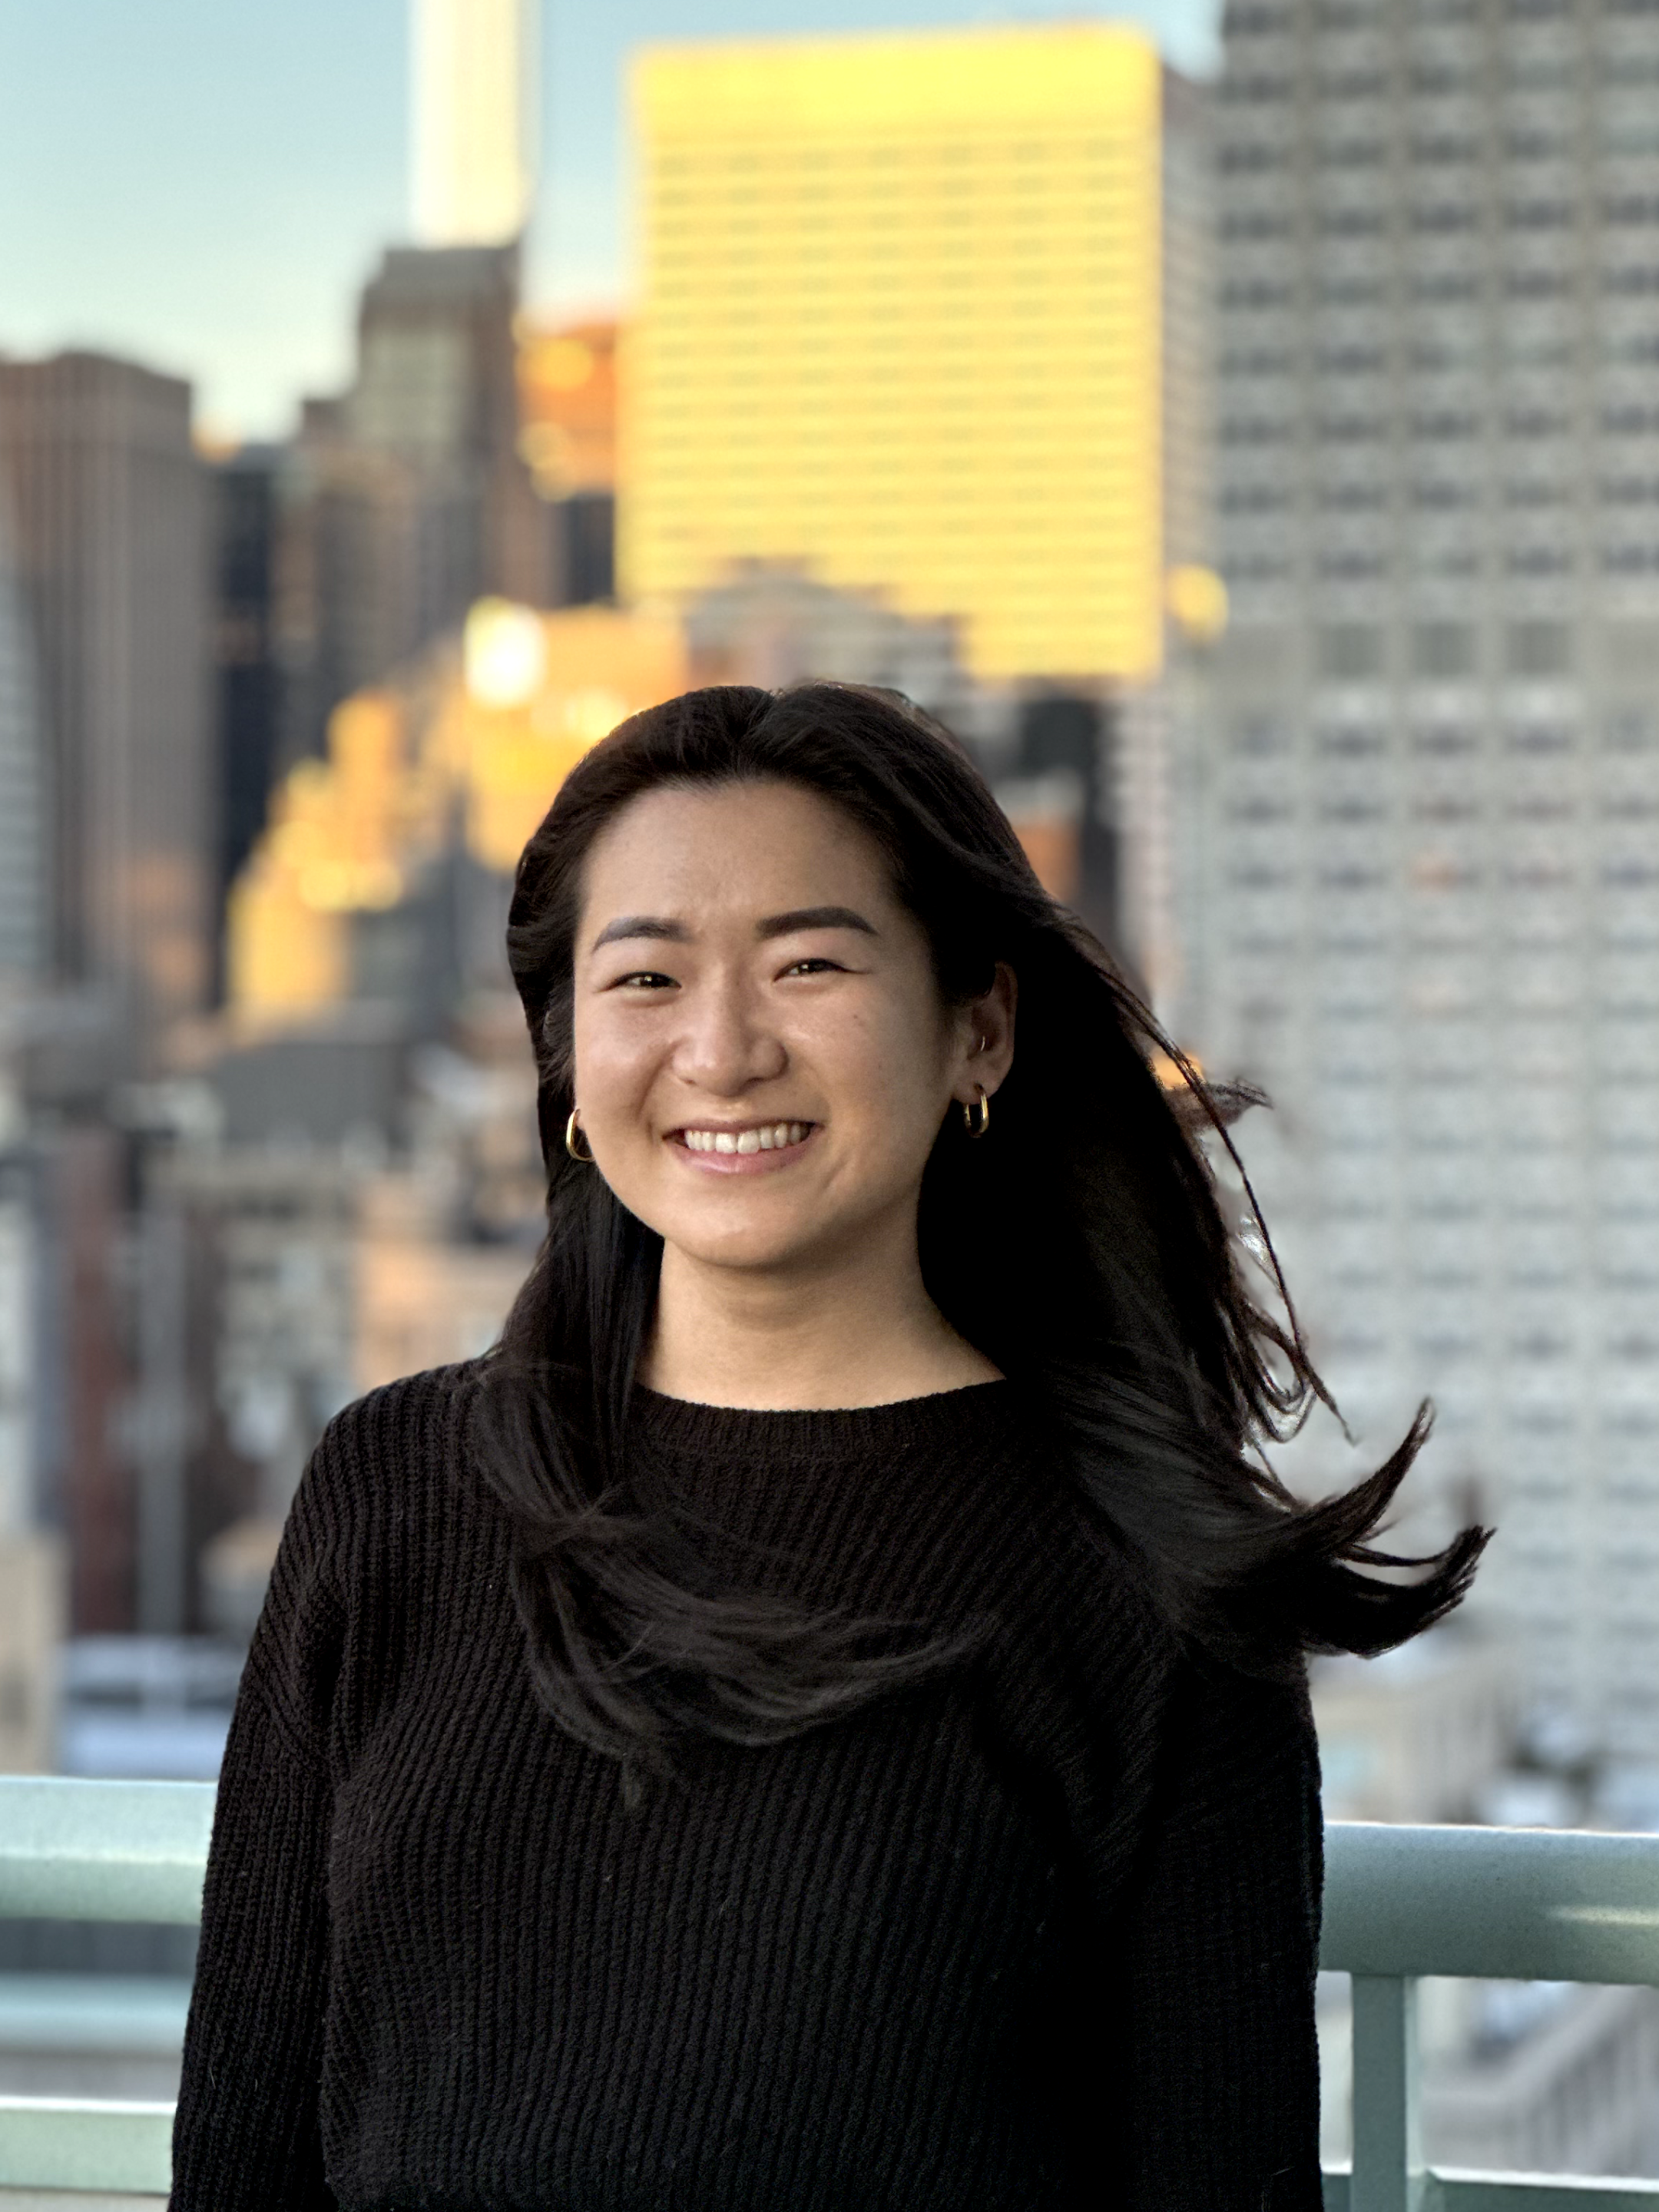 Shannon is a Los Angeles native who studied Rhetoric and Sociology at UC Berkeley. Before landing in New York as a program manager, she lived in Beijing and Austin. In her free time she enjoys reading, listening to podcasts, and doing yoga.